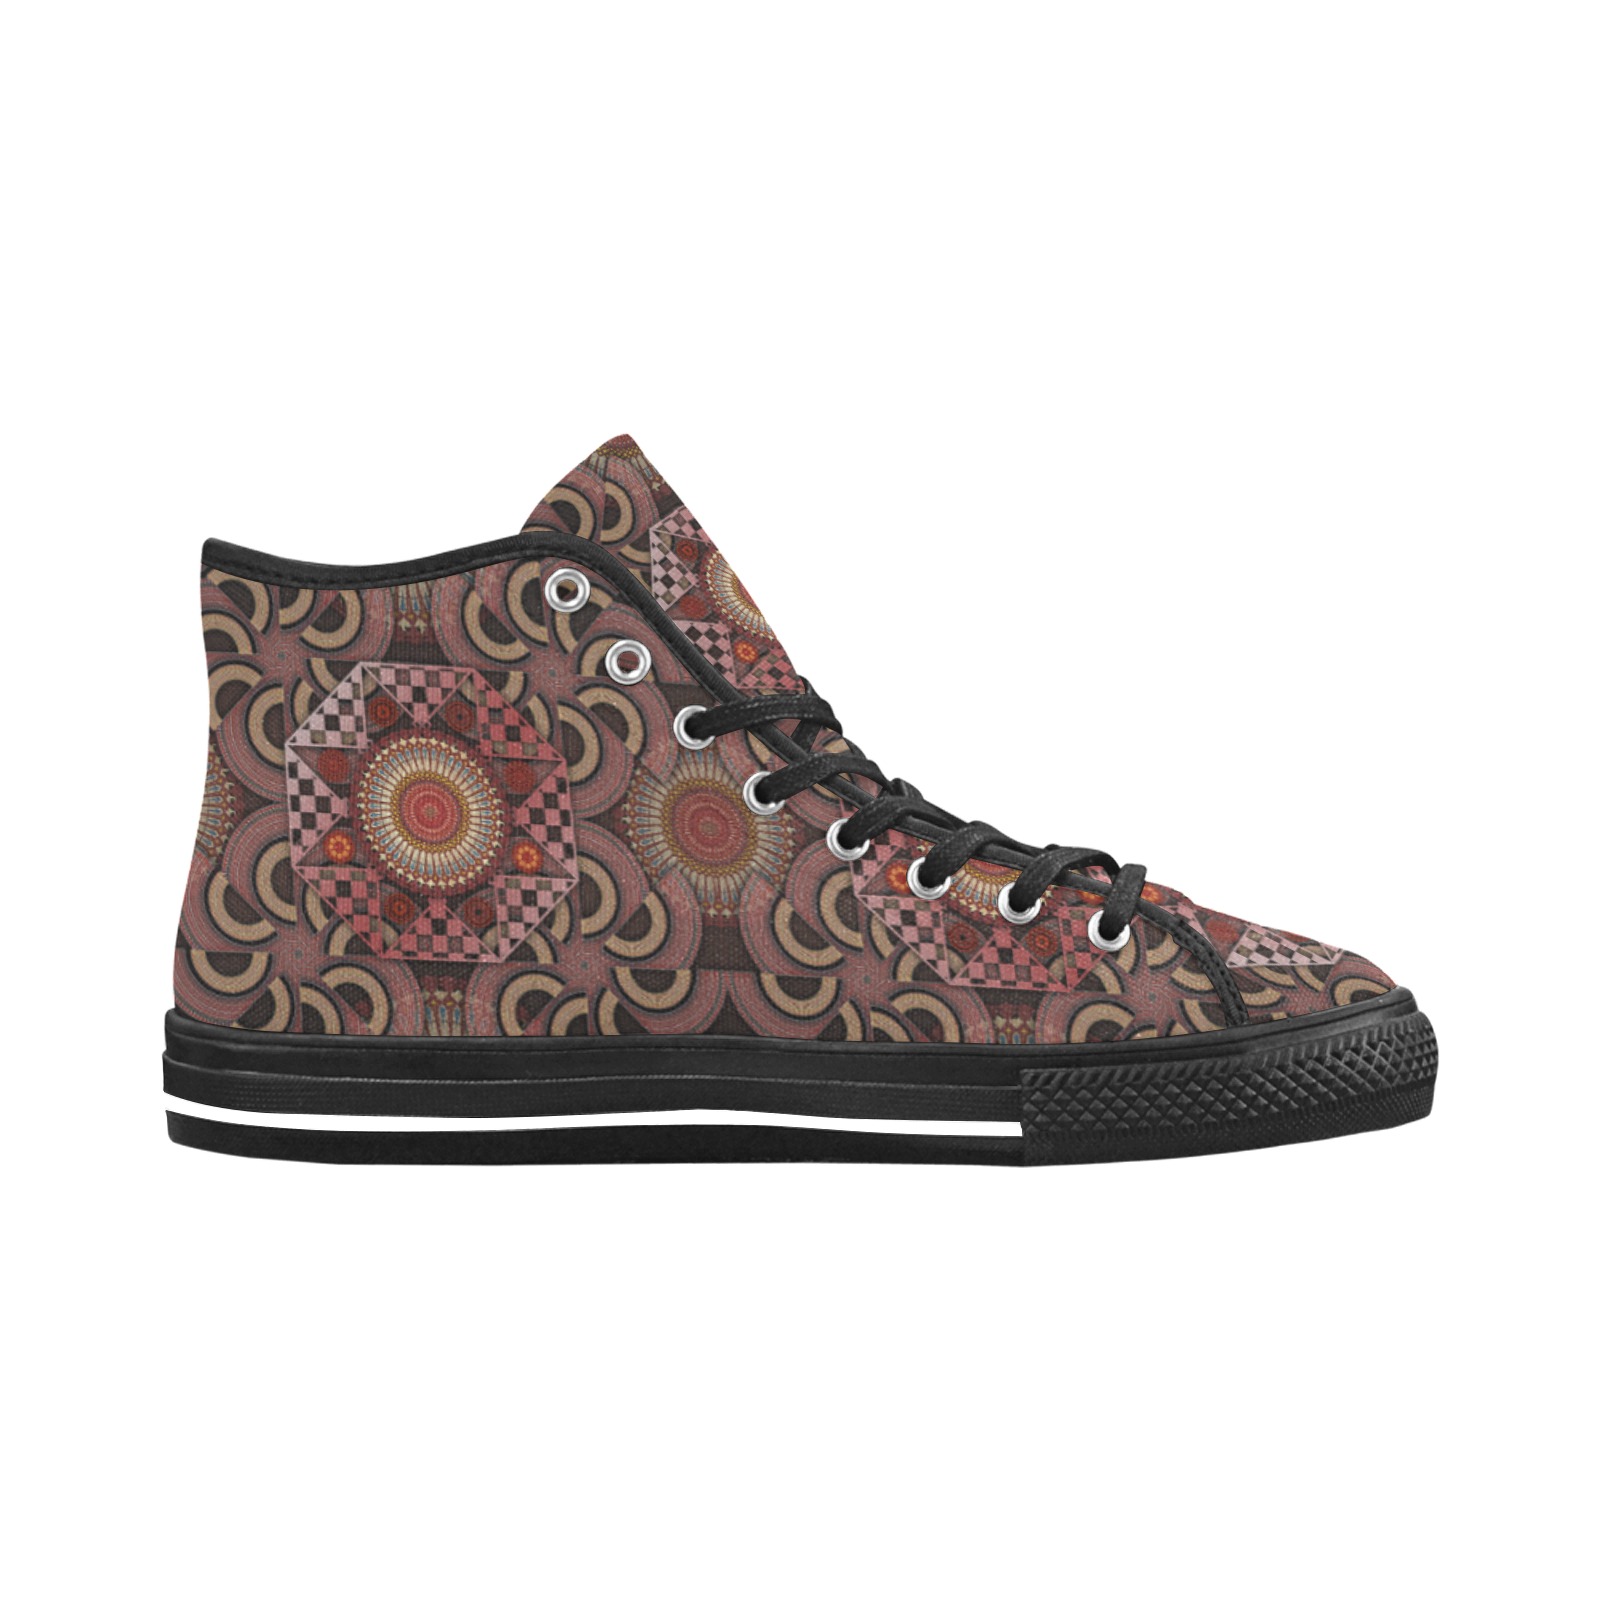 Persian sunniest framed ethnic semicircle mandala Vancouver H Men's Canvas Shoes (1013-1)